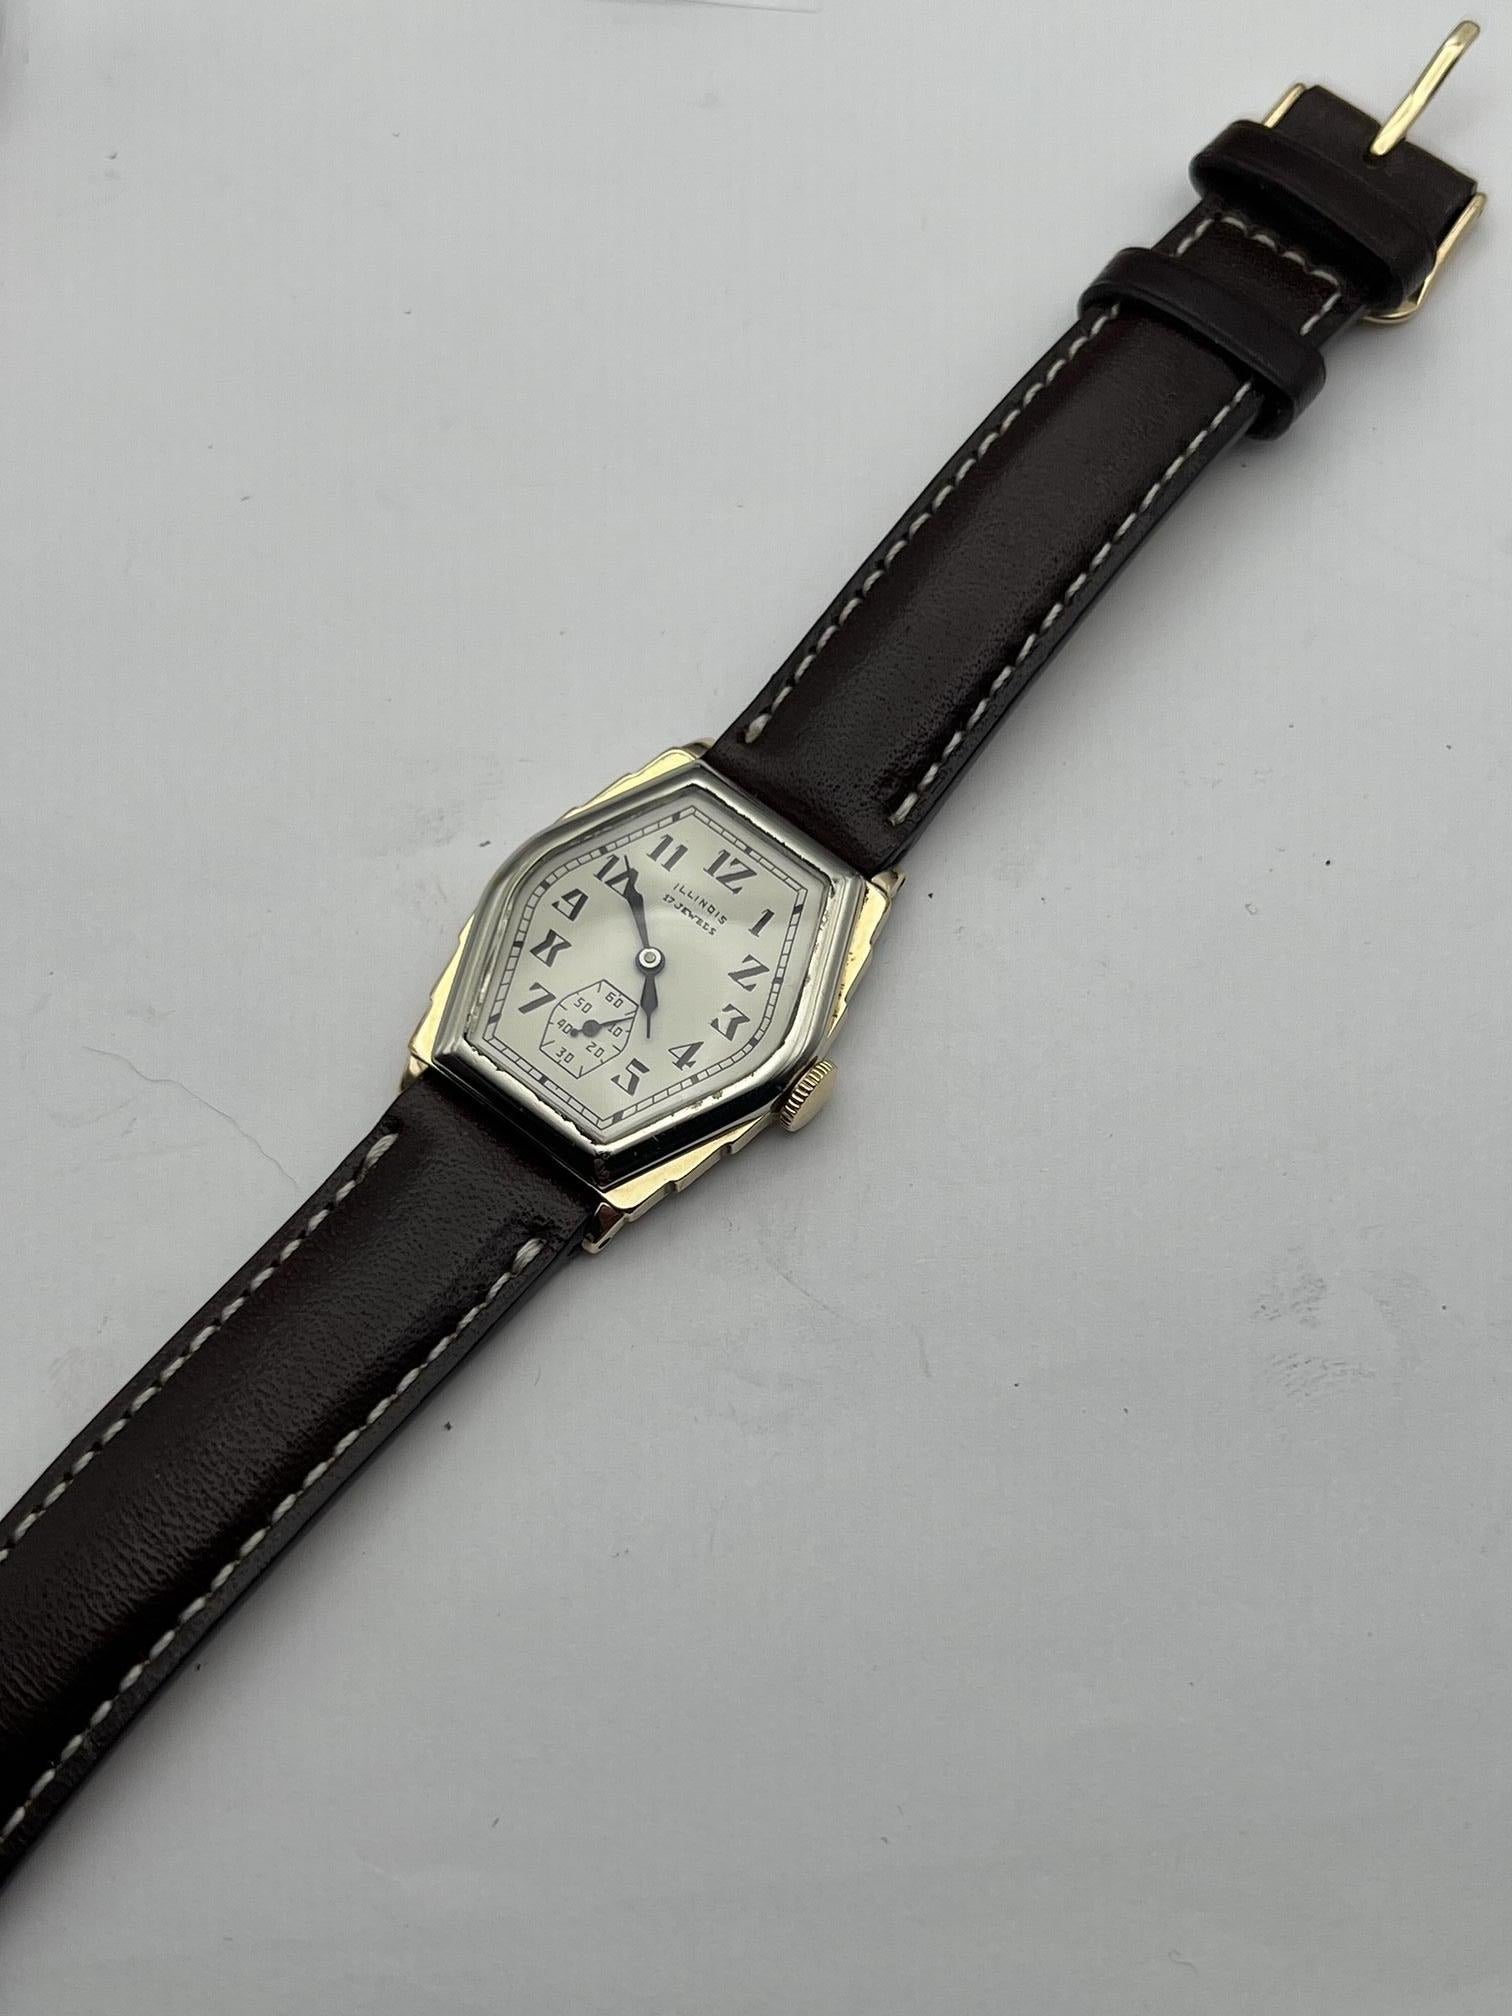 The Illinois watch company has long been considered the greatest American Watch Company that had an early demise to management and the great depression. The made some of the best movements of their day. 

One word describes this watch: “Ritz” ! A